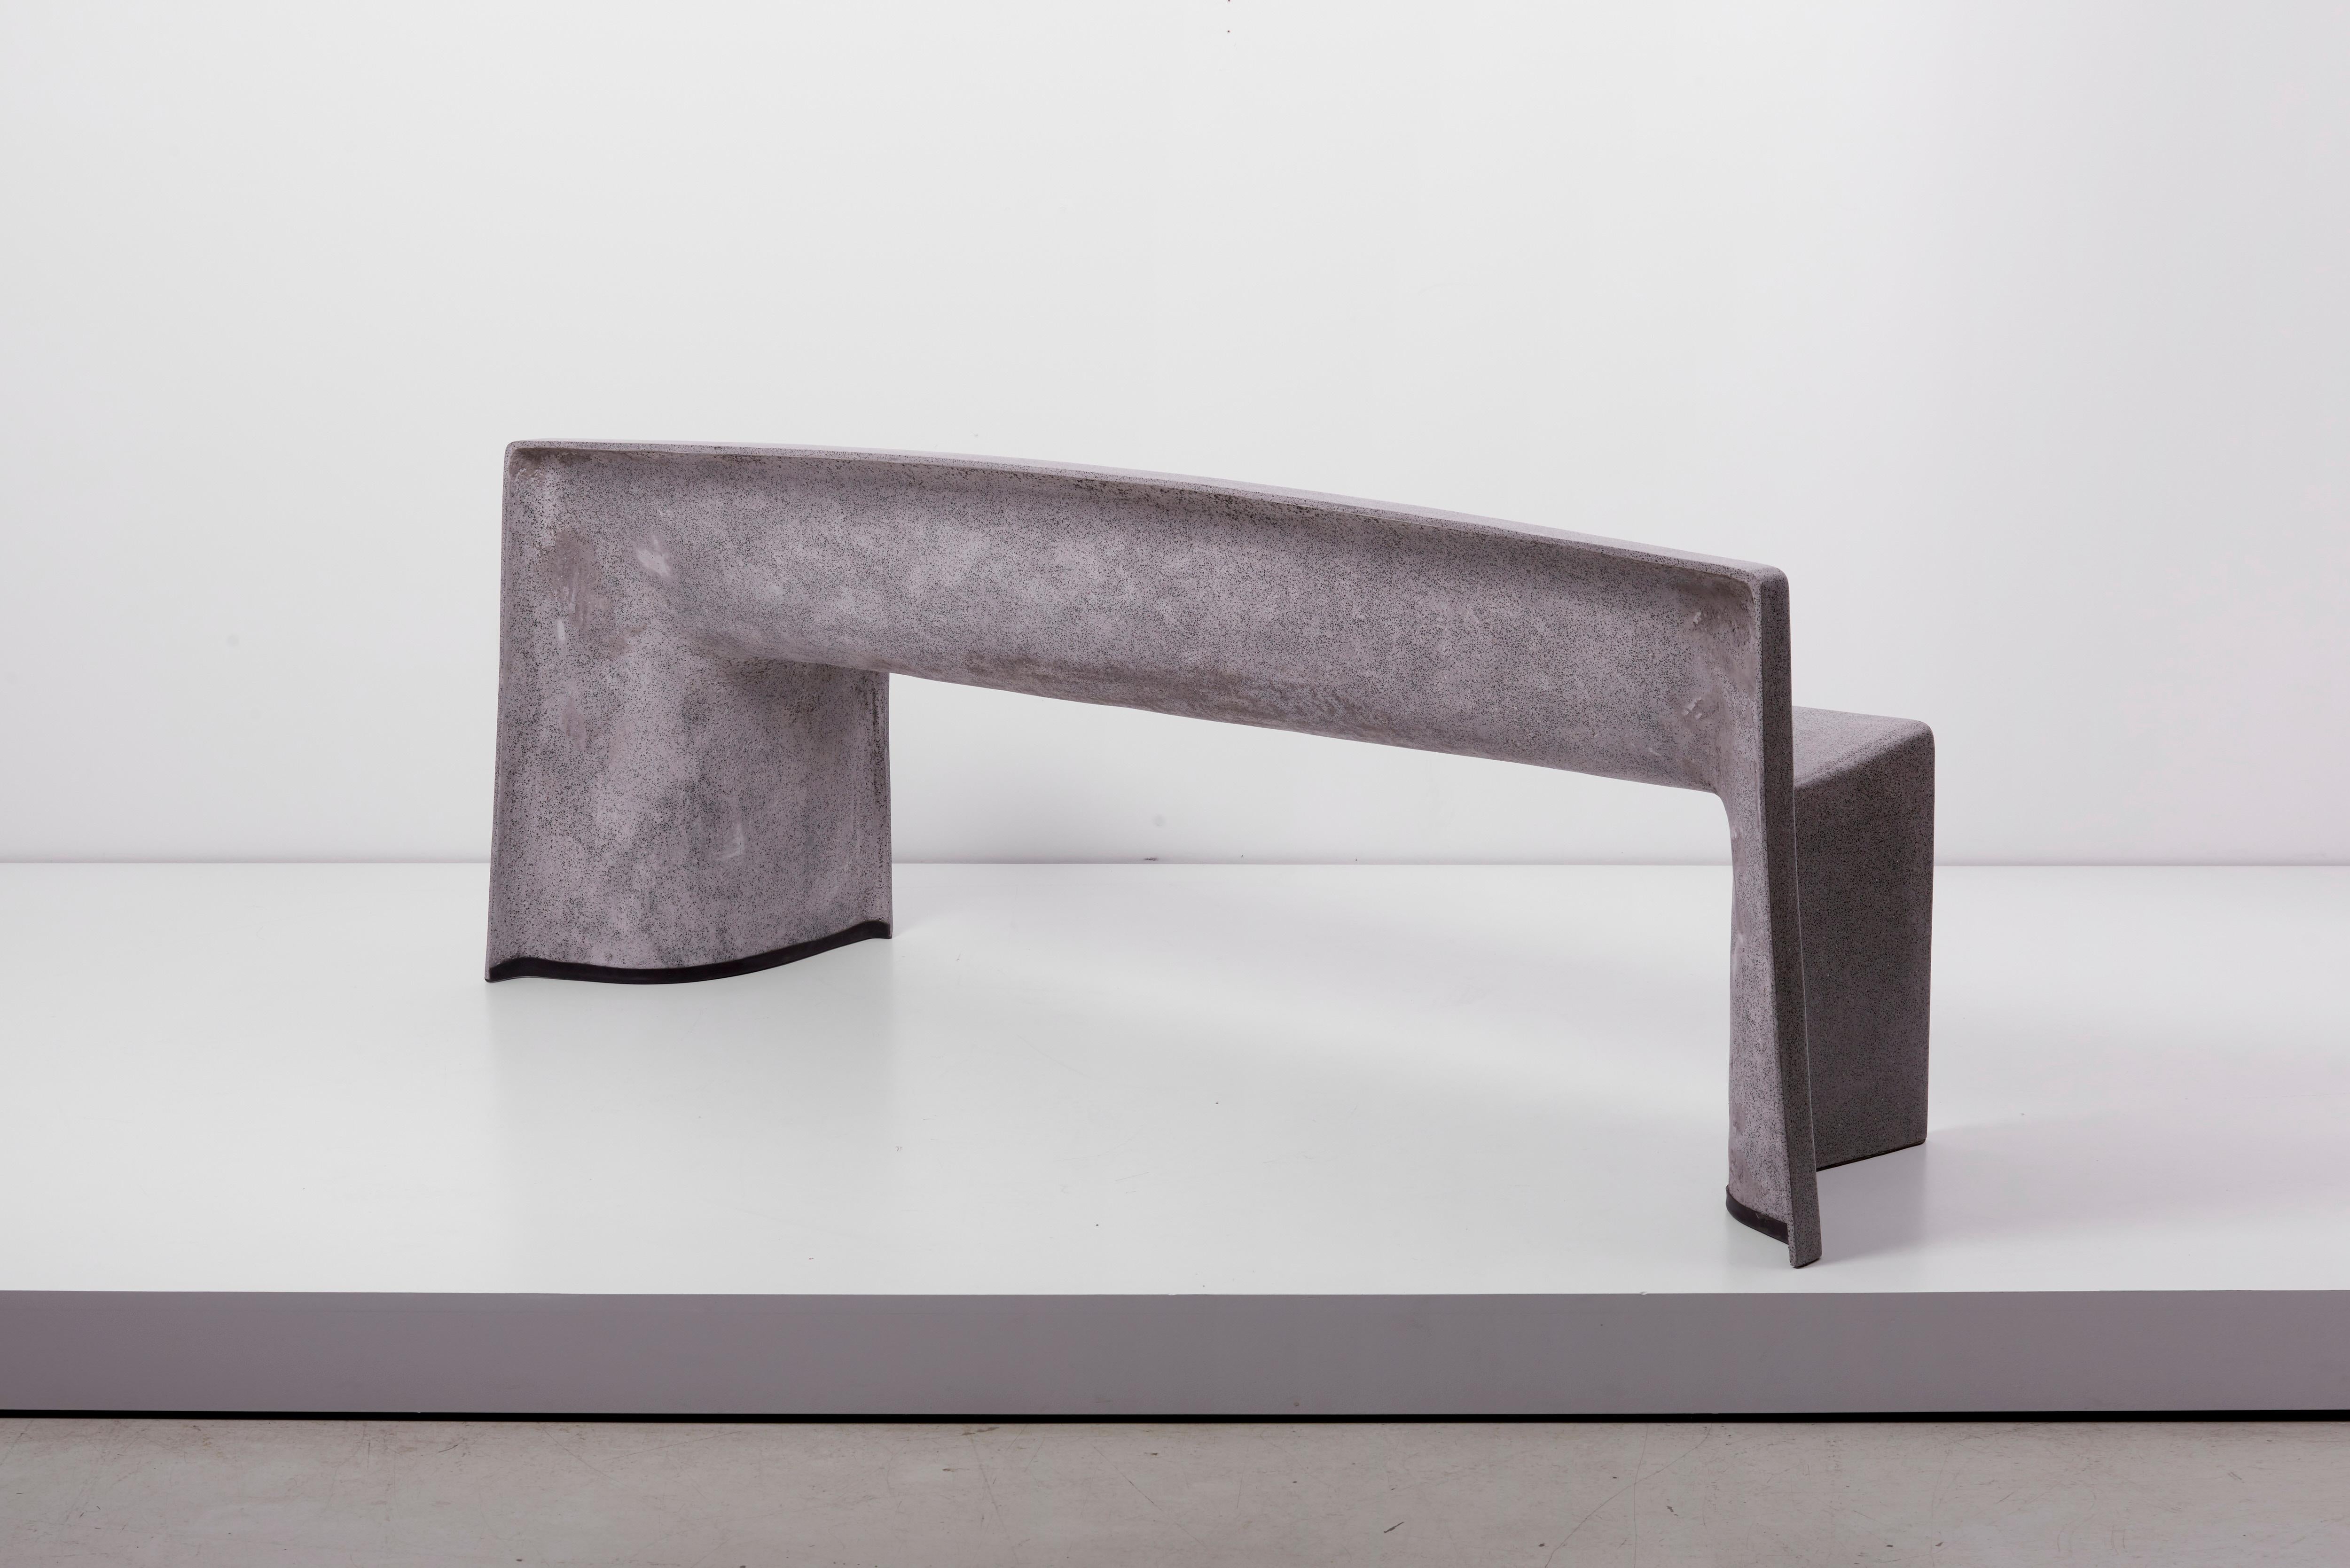 Contemporary Architectural Concrete Bench by Martin Kleppe, Germany, circa 2011 For Sale